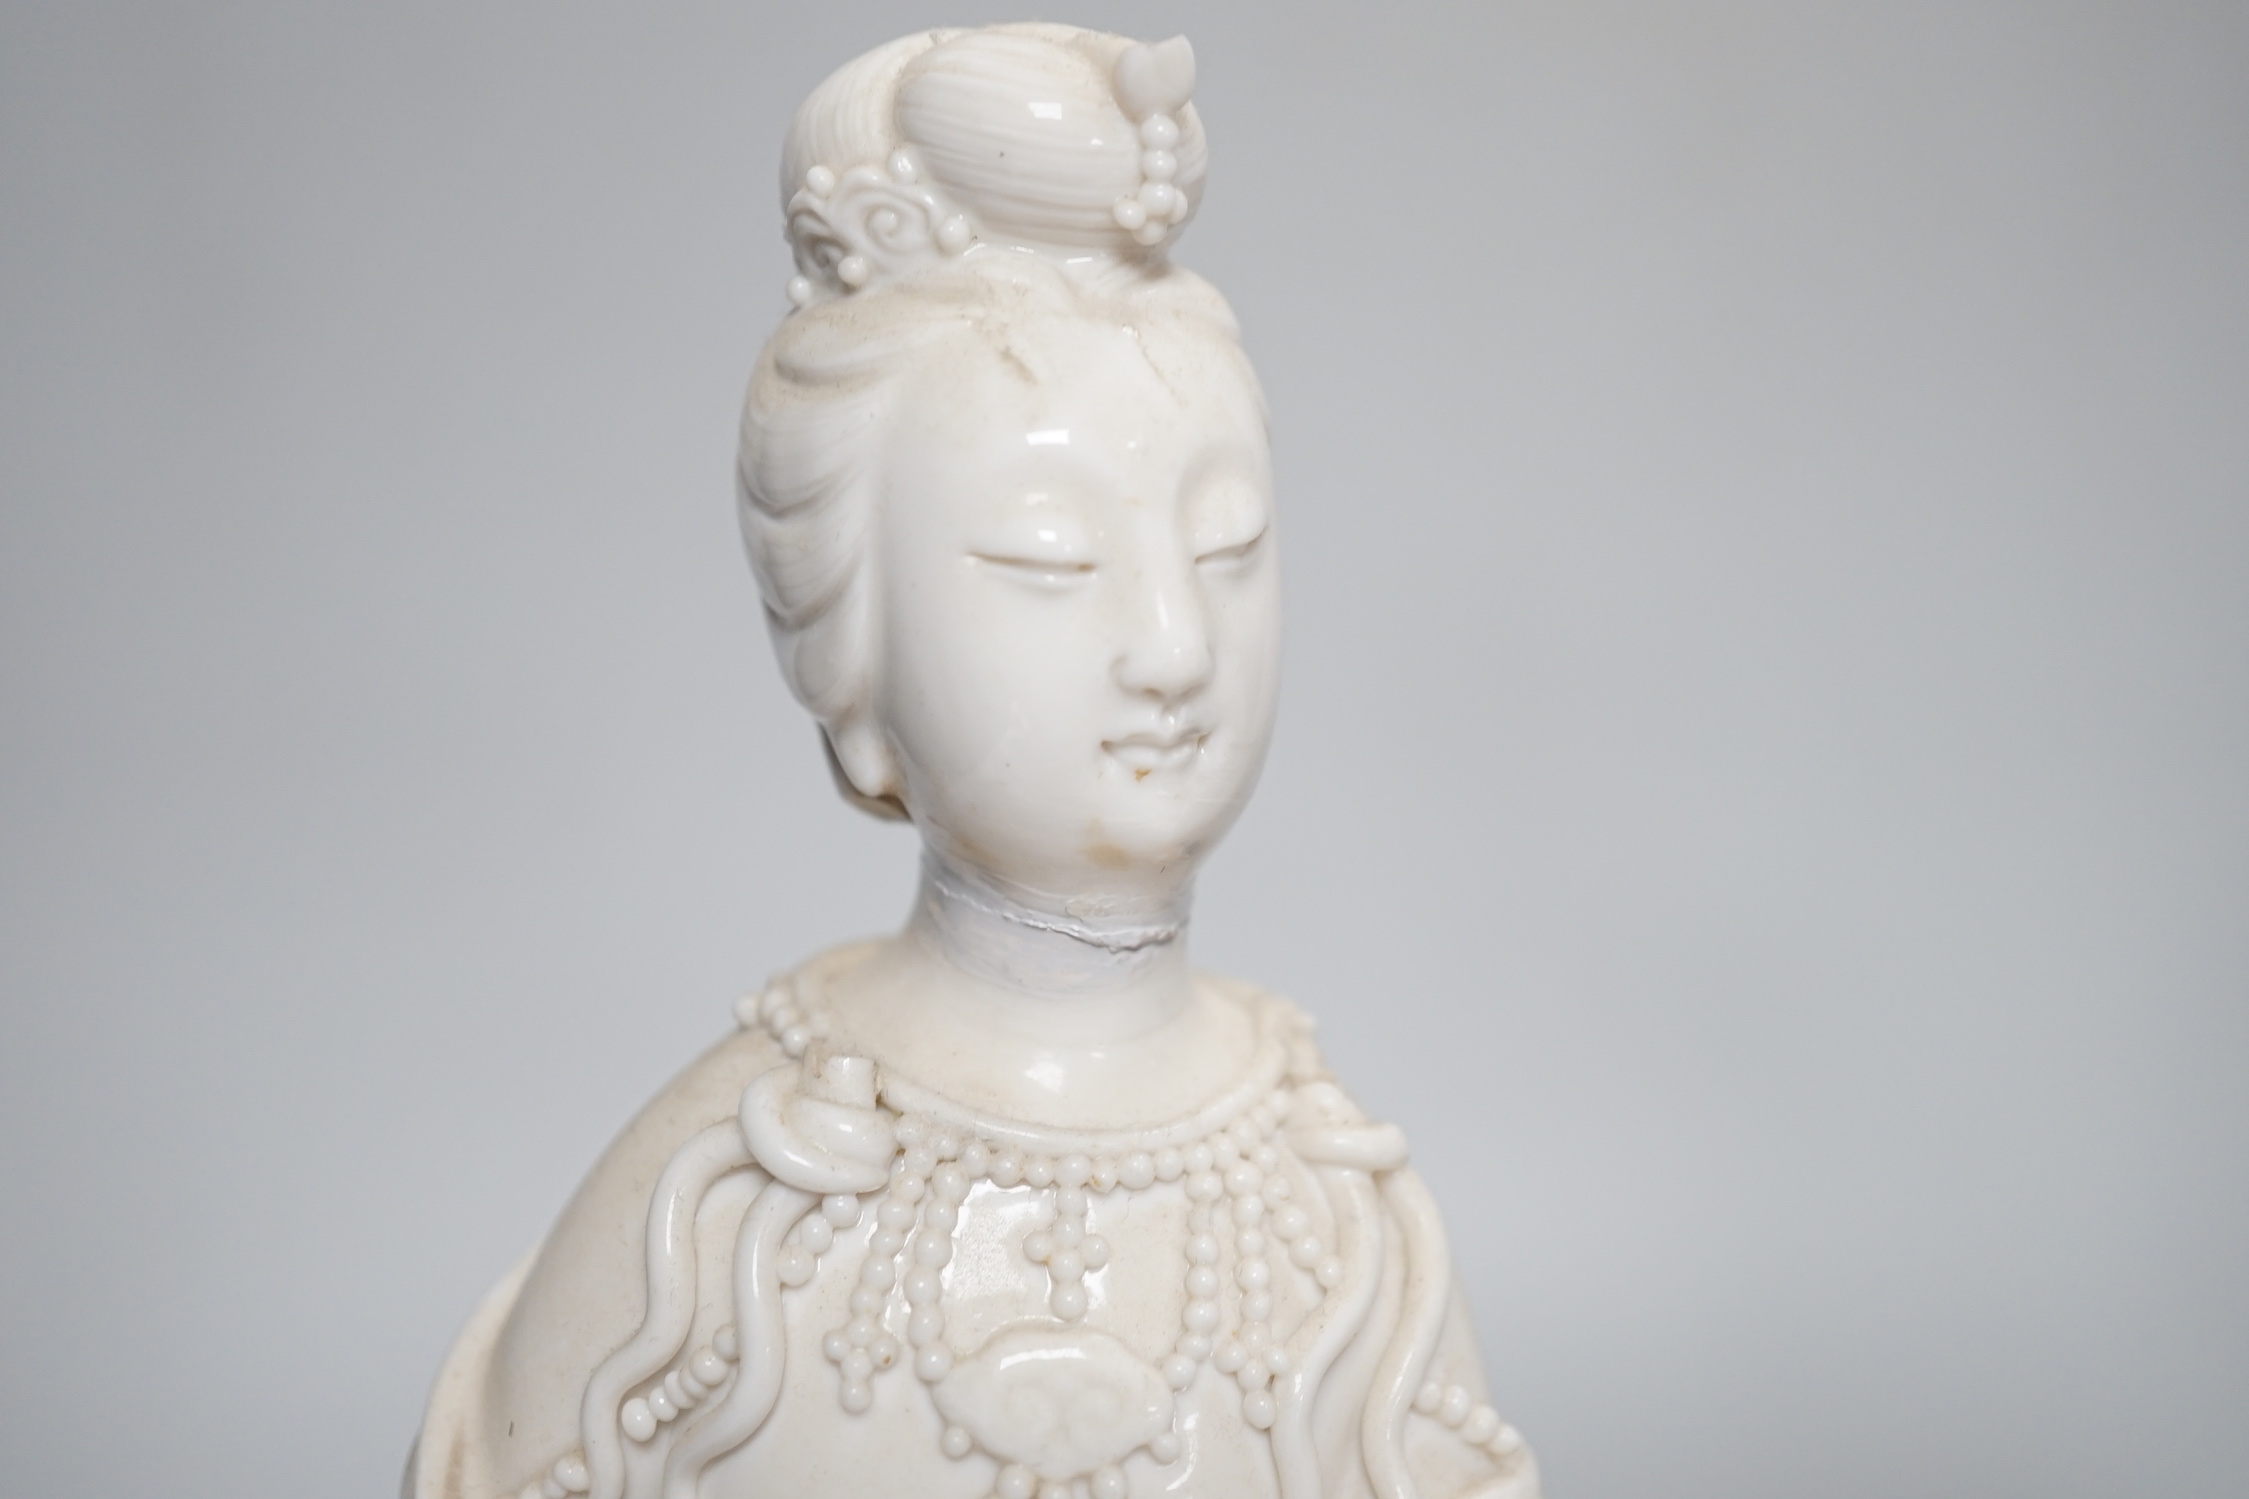 Three Chinese blanc de chine figures of Guanyin, 25cm